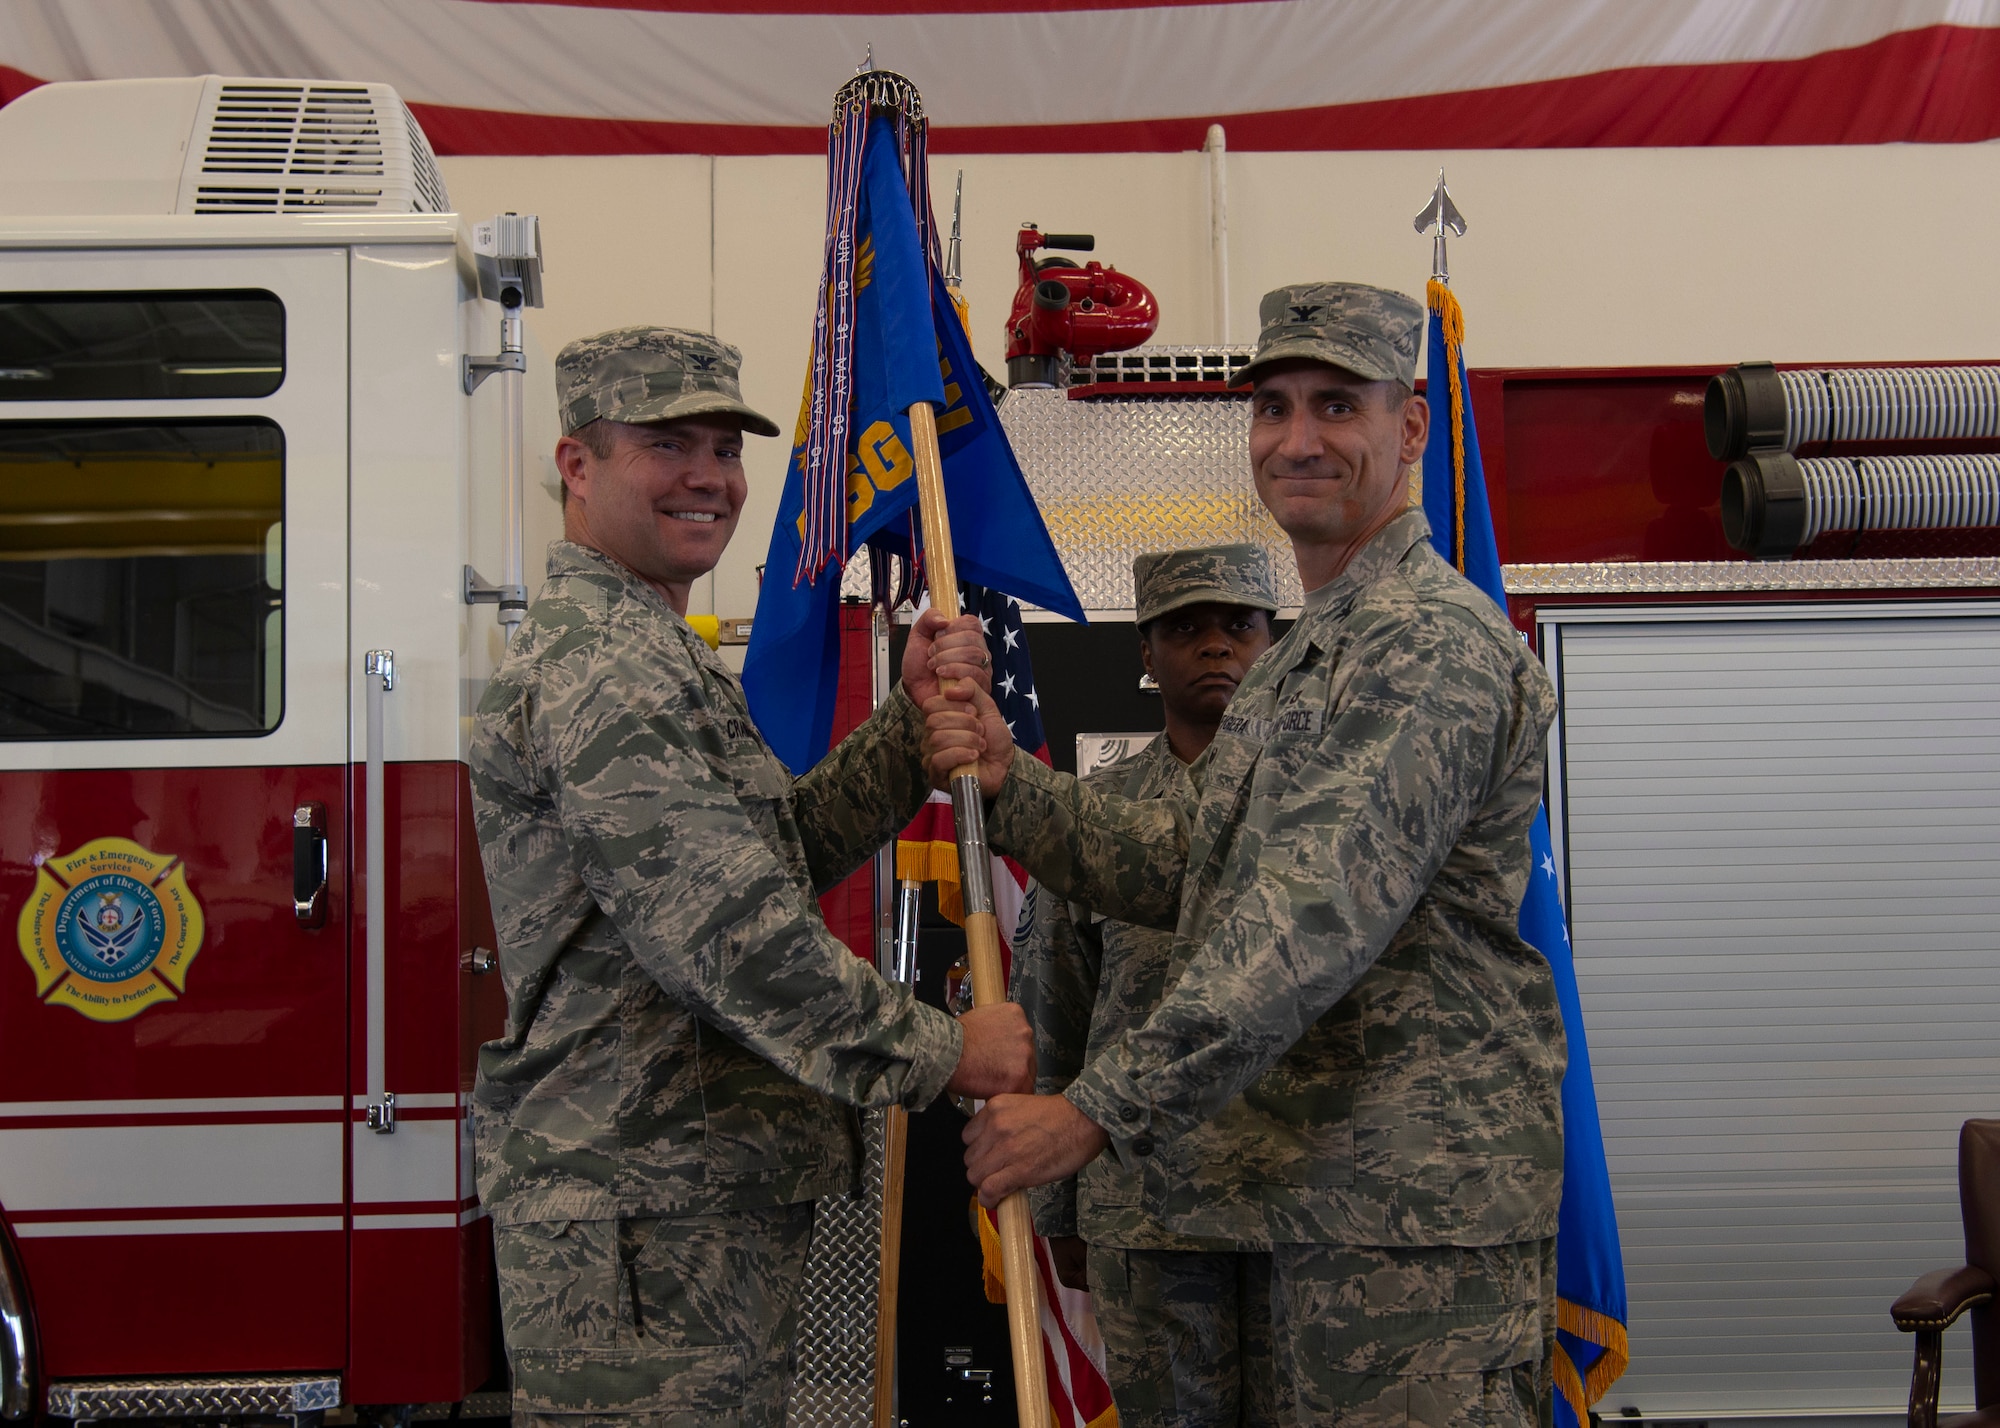 U.S. Air Force Col. Cavan Craddock, commander 99th Air Base Wing, passes the guidon to Col. Anthony Figiera, commander 99 Mission Support Group, during the 99th MSG change of command ceremony on Nellis Air Force Base, Nev., July 7, 2019. The 99th MSG has more than 3,000 military personnel and supports over 479,000 customers annually. (U.S. Air Force photo by SrA Stephanie Gelardo)